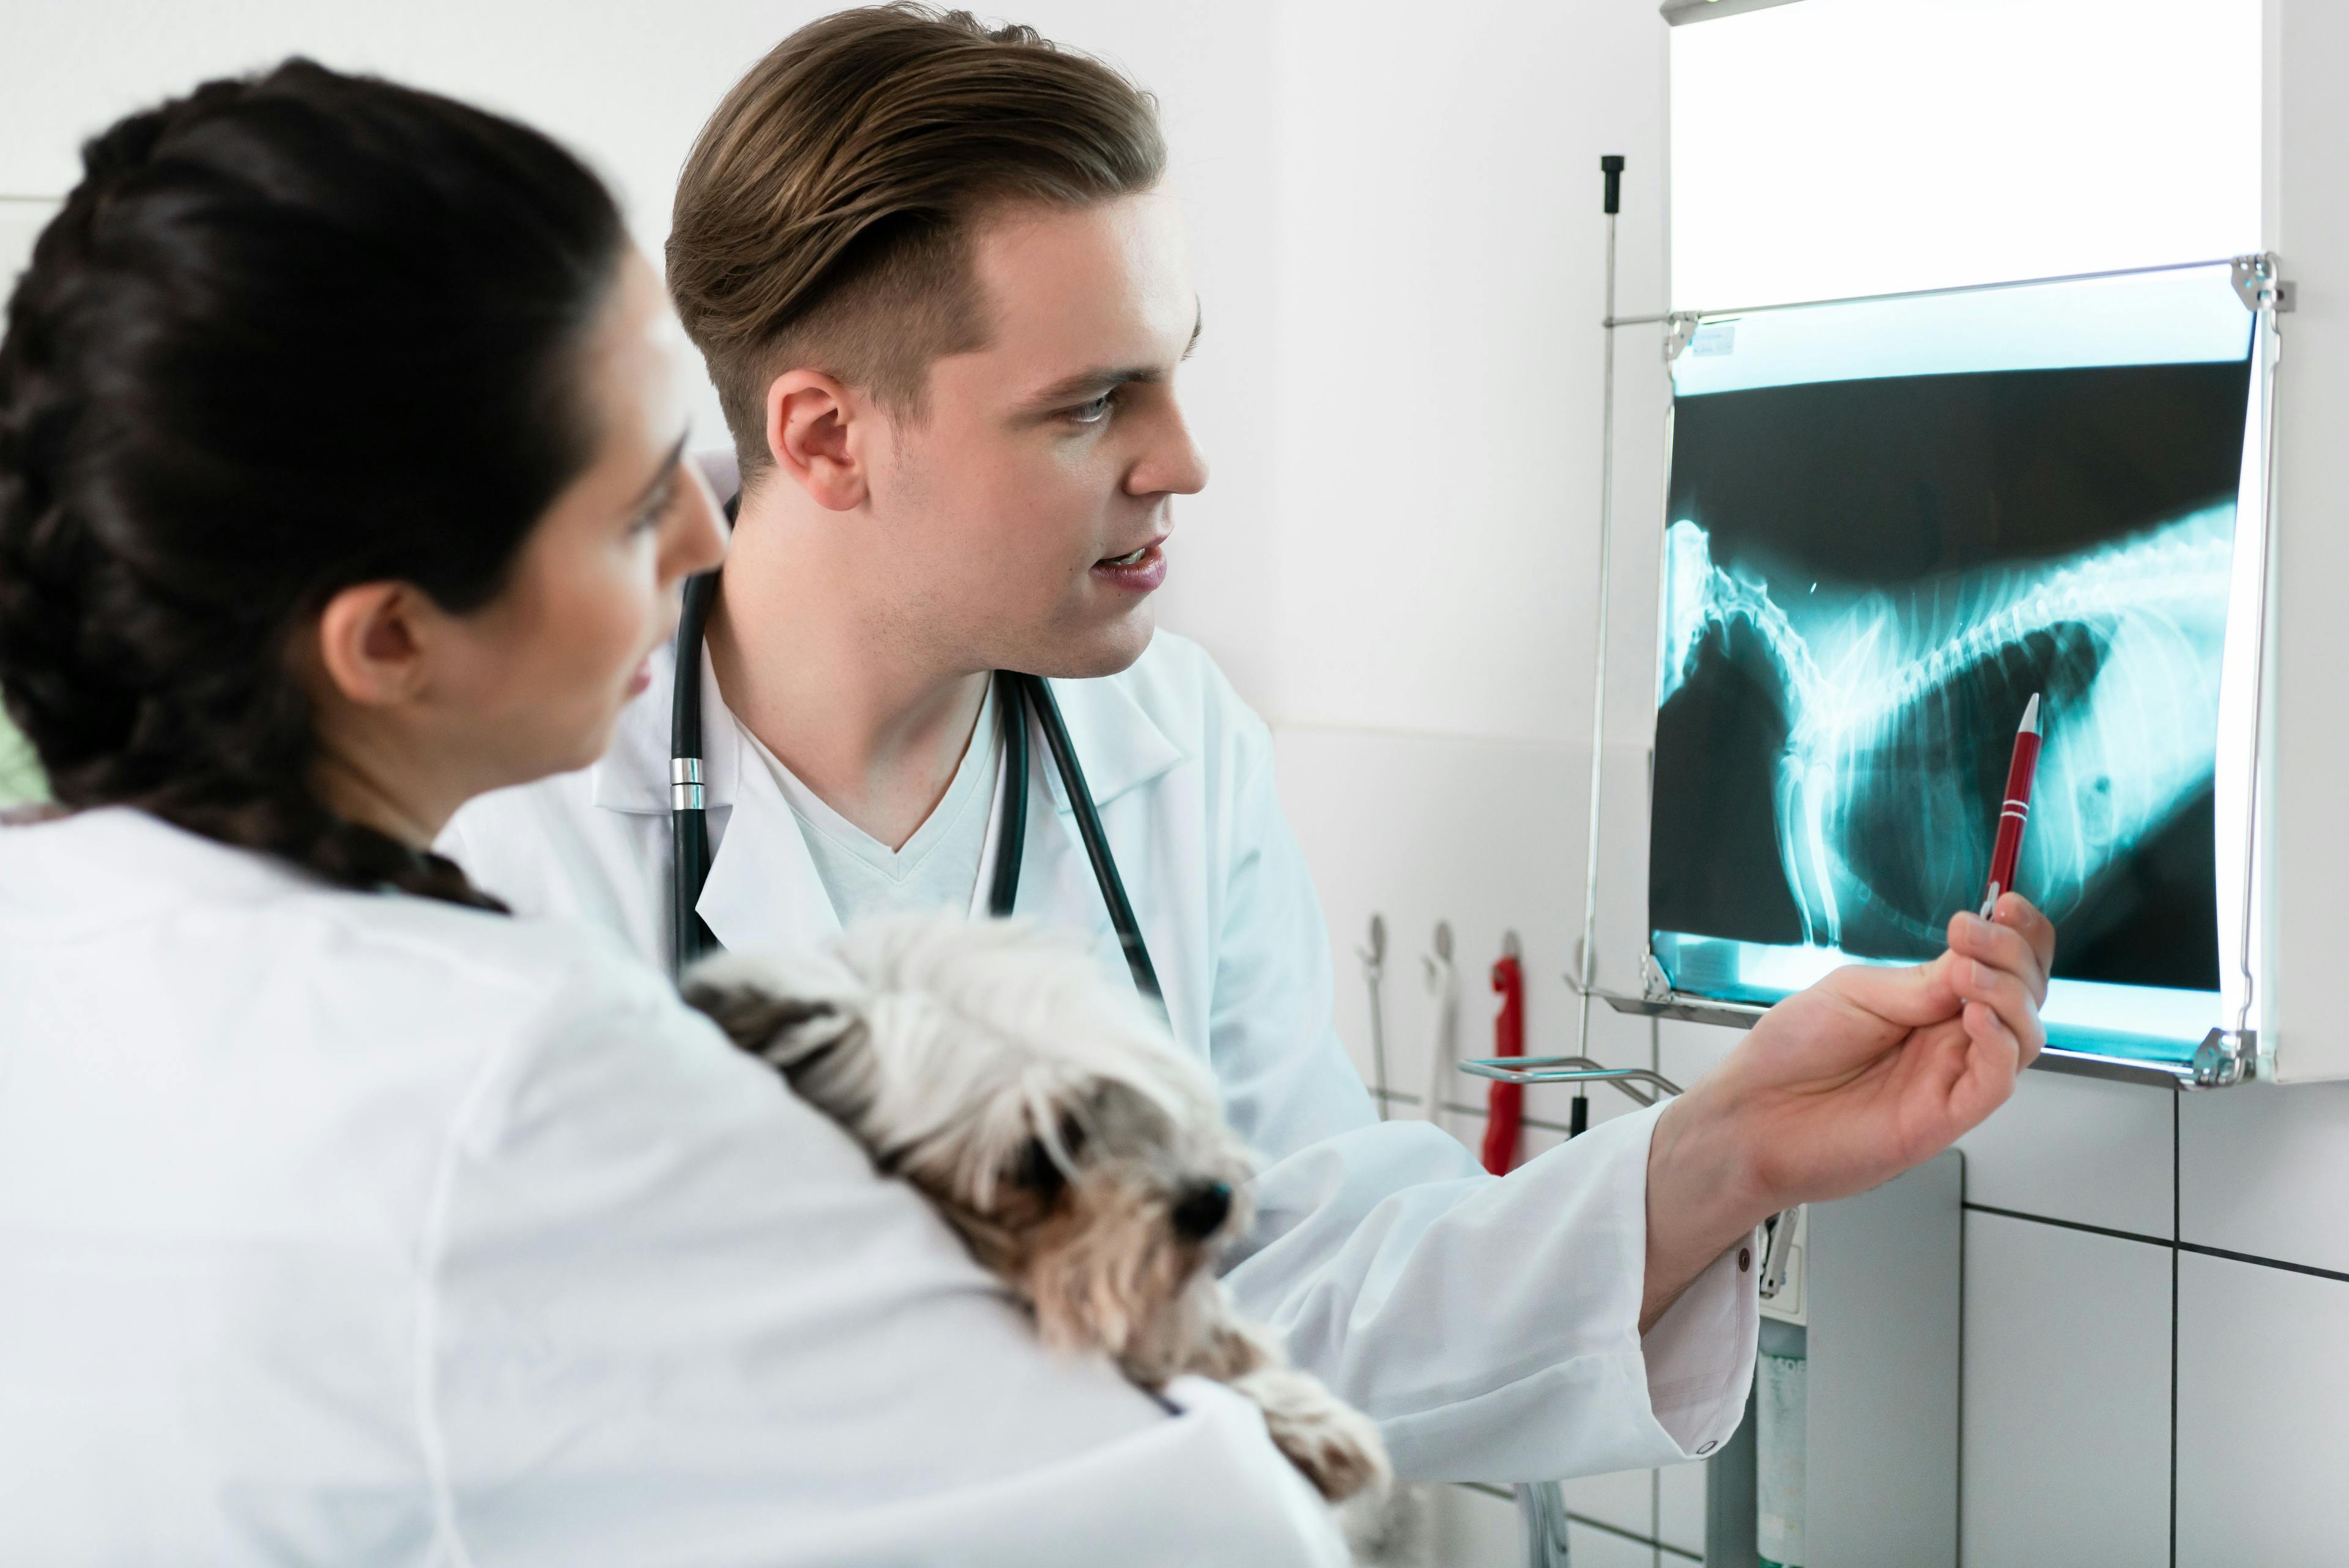 Two veterinary professionals discuss imaging results